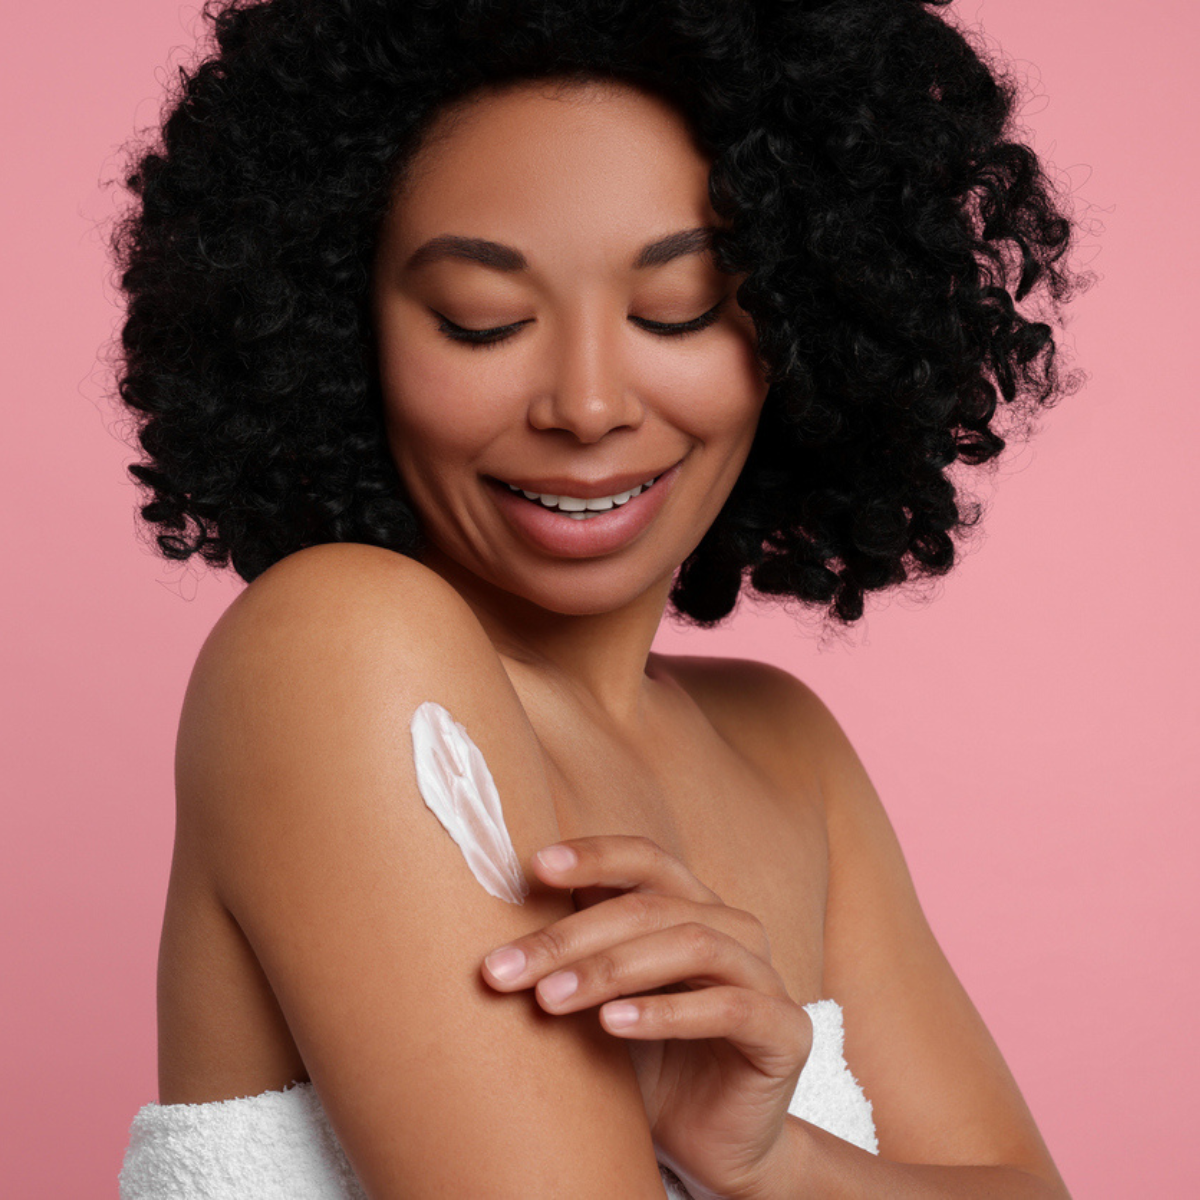 A black woman using body cream on her arm to smoot the skin texture and even her skin tone.